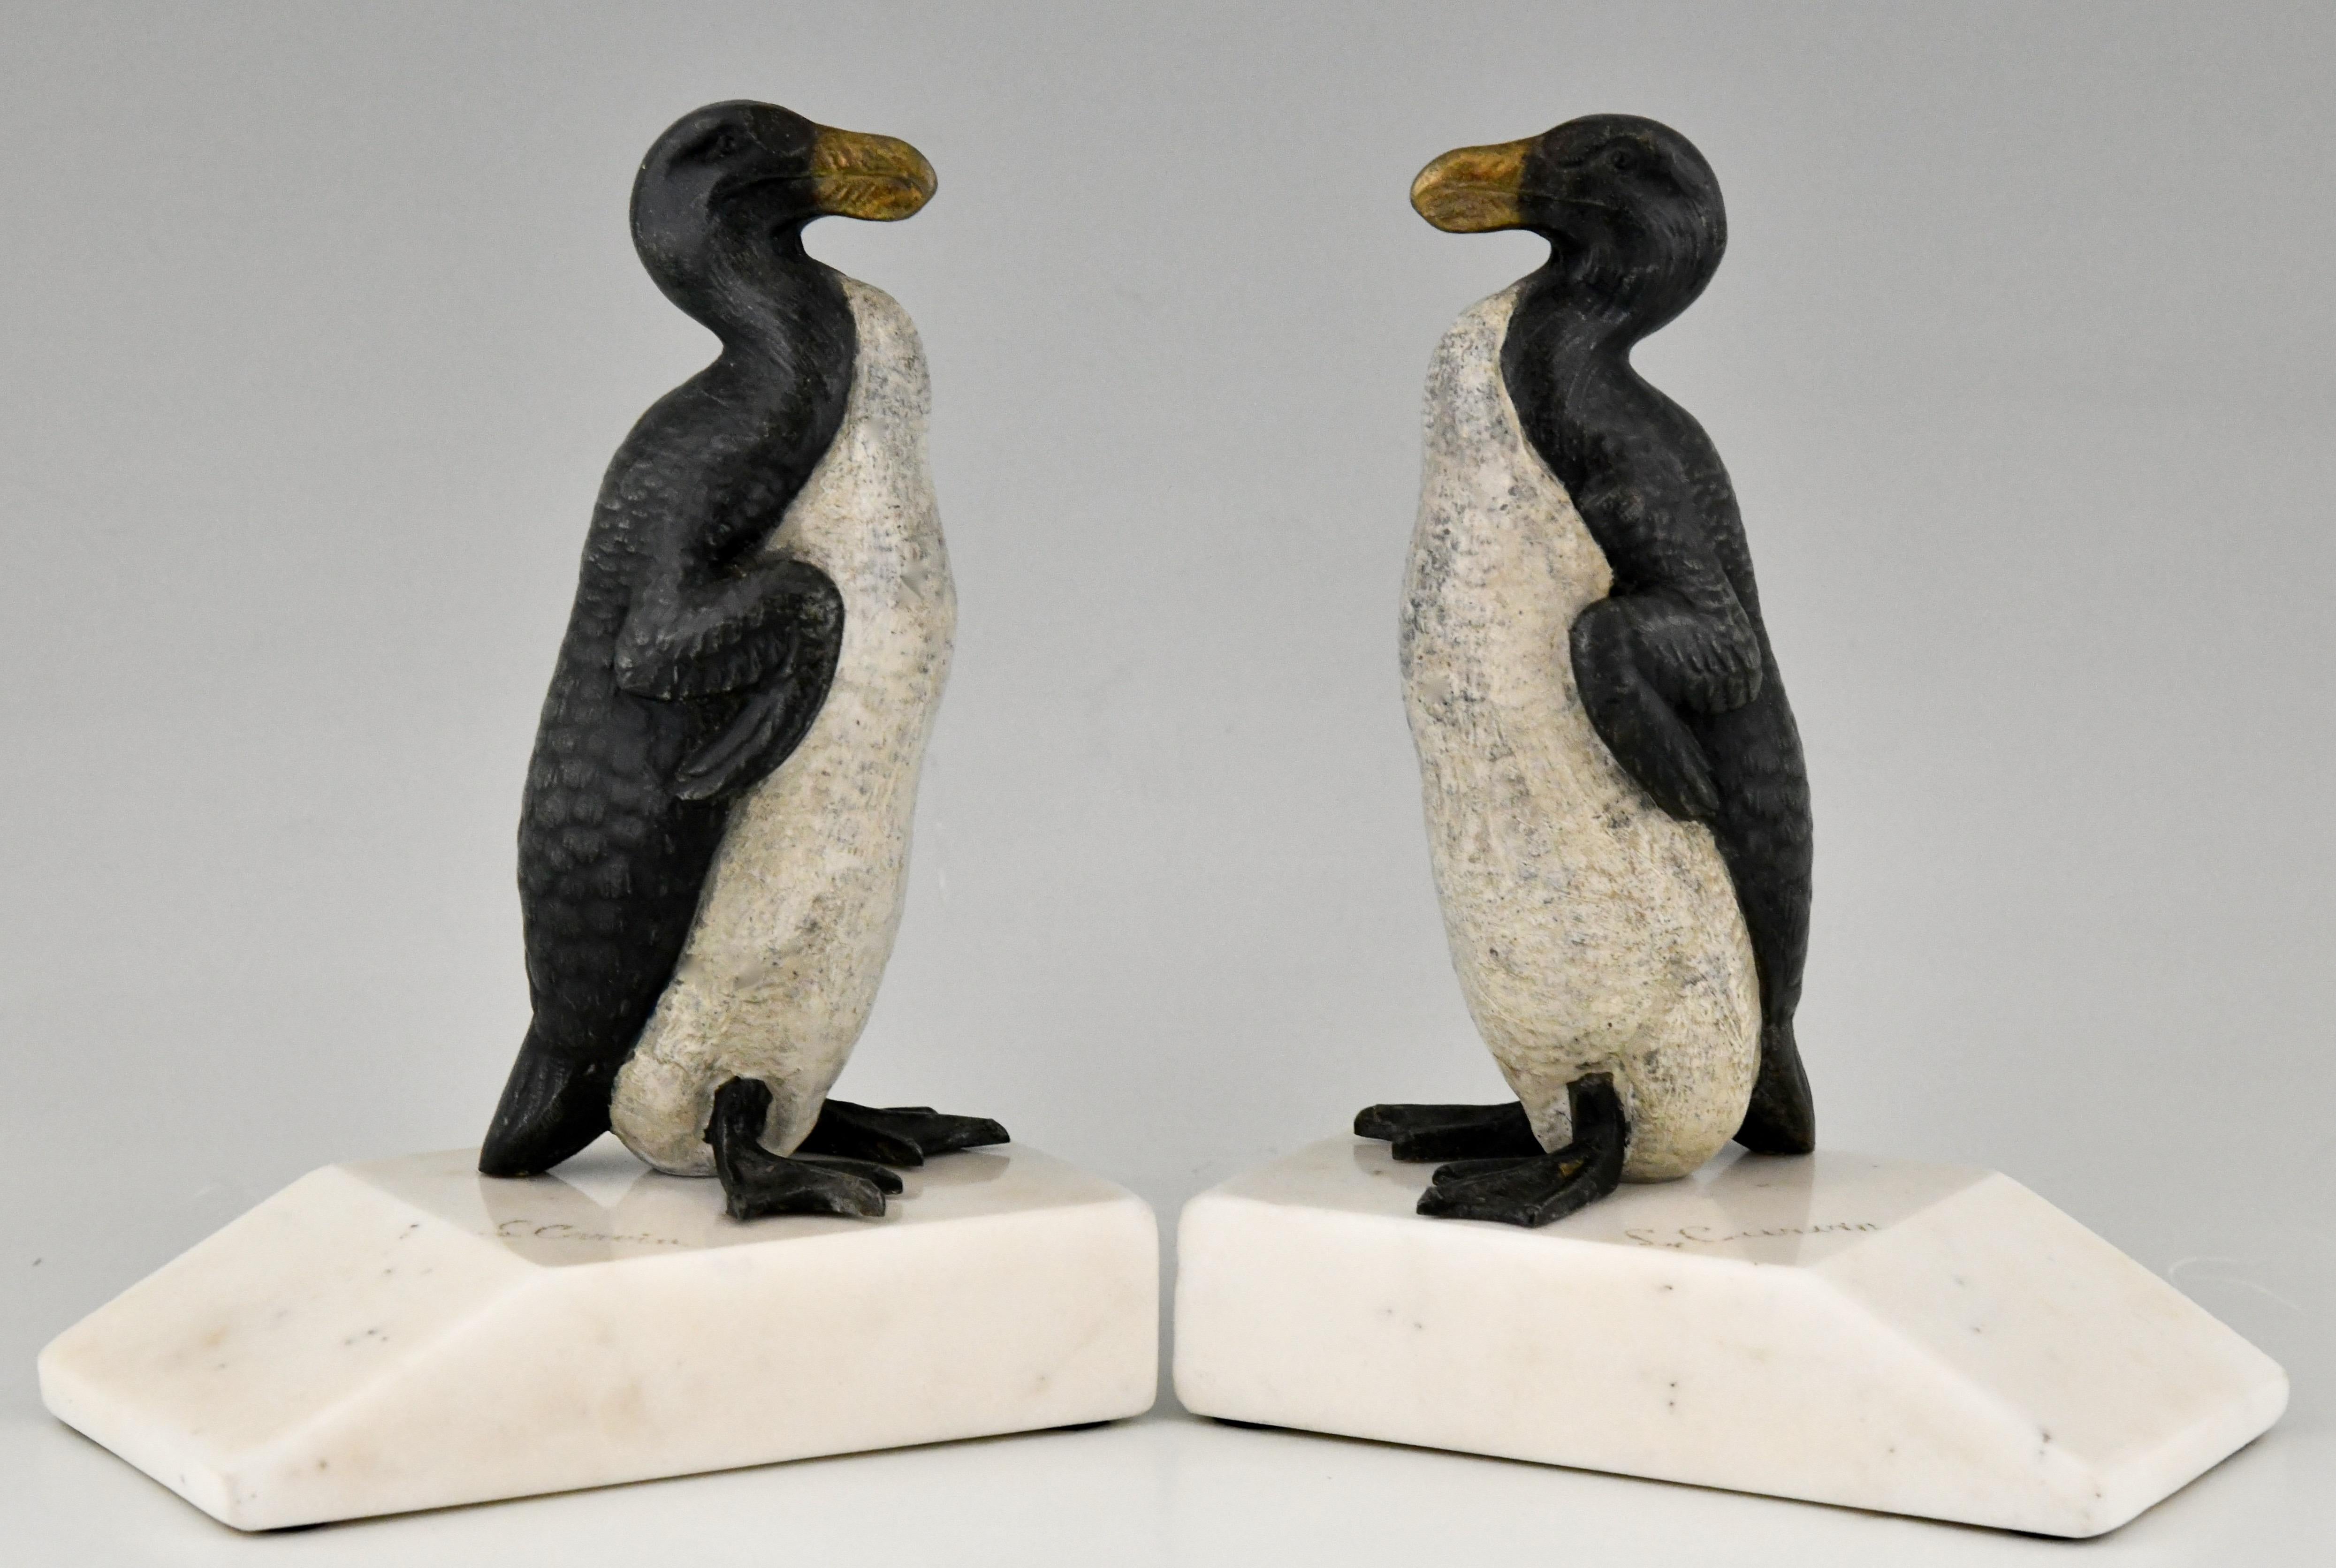 Art Deco great auk penguin bookends by Louis Albert Carvin. Patinated Art metal on a white marble base.

Literature:
Animals in bronze by Christopher Payne. Antique collectors club. Les bronzes de XIXe siècle by Pierre Kjellberg, Les éditions des